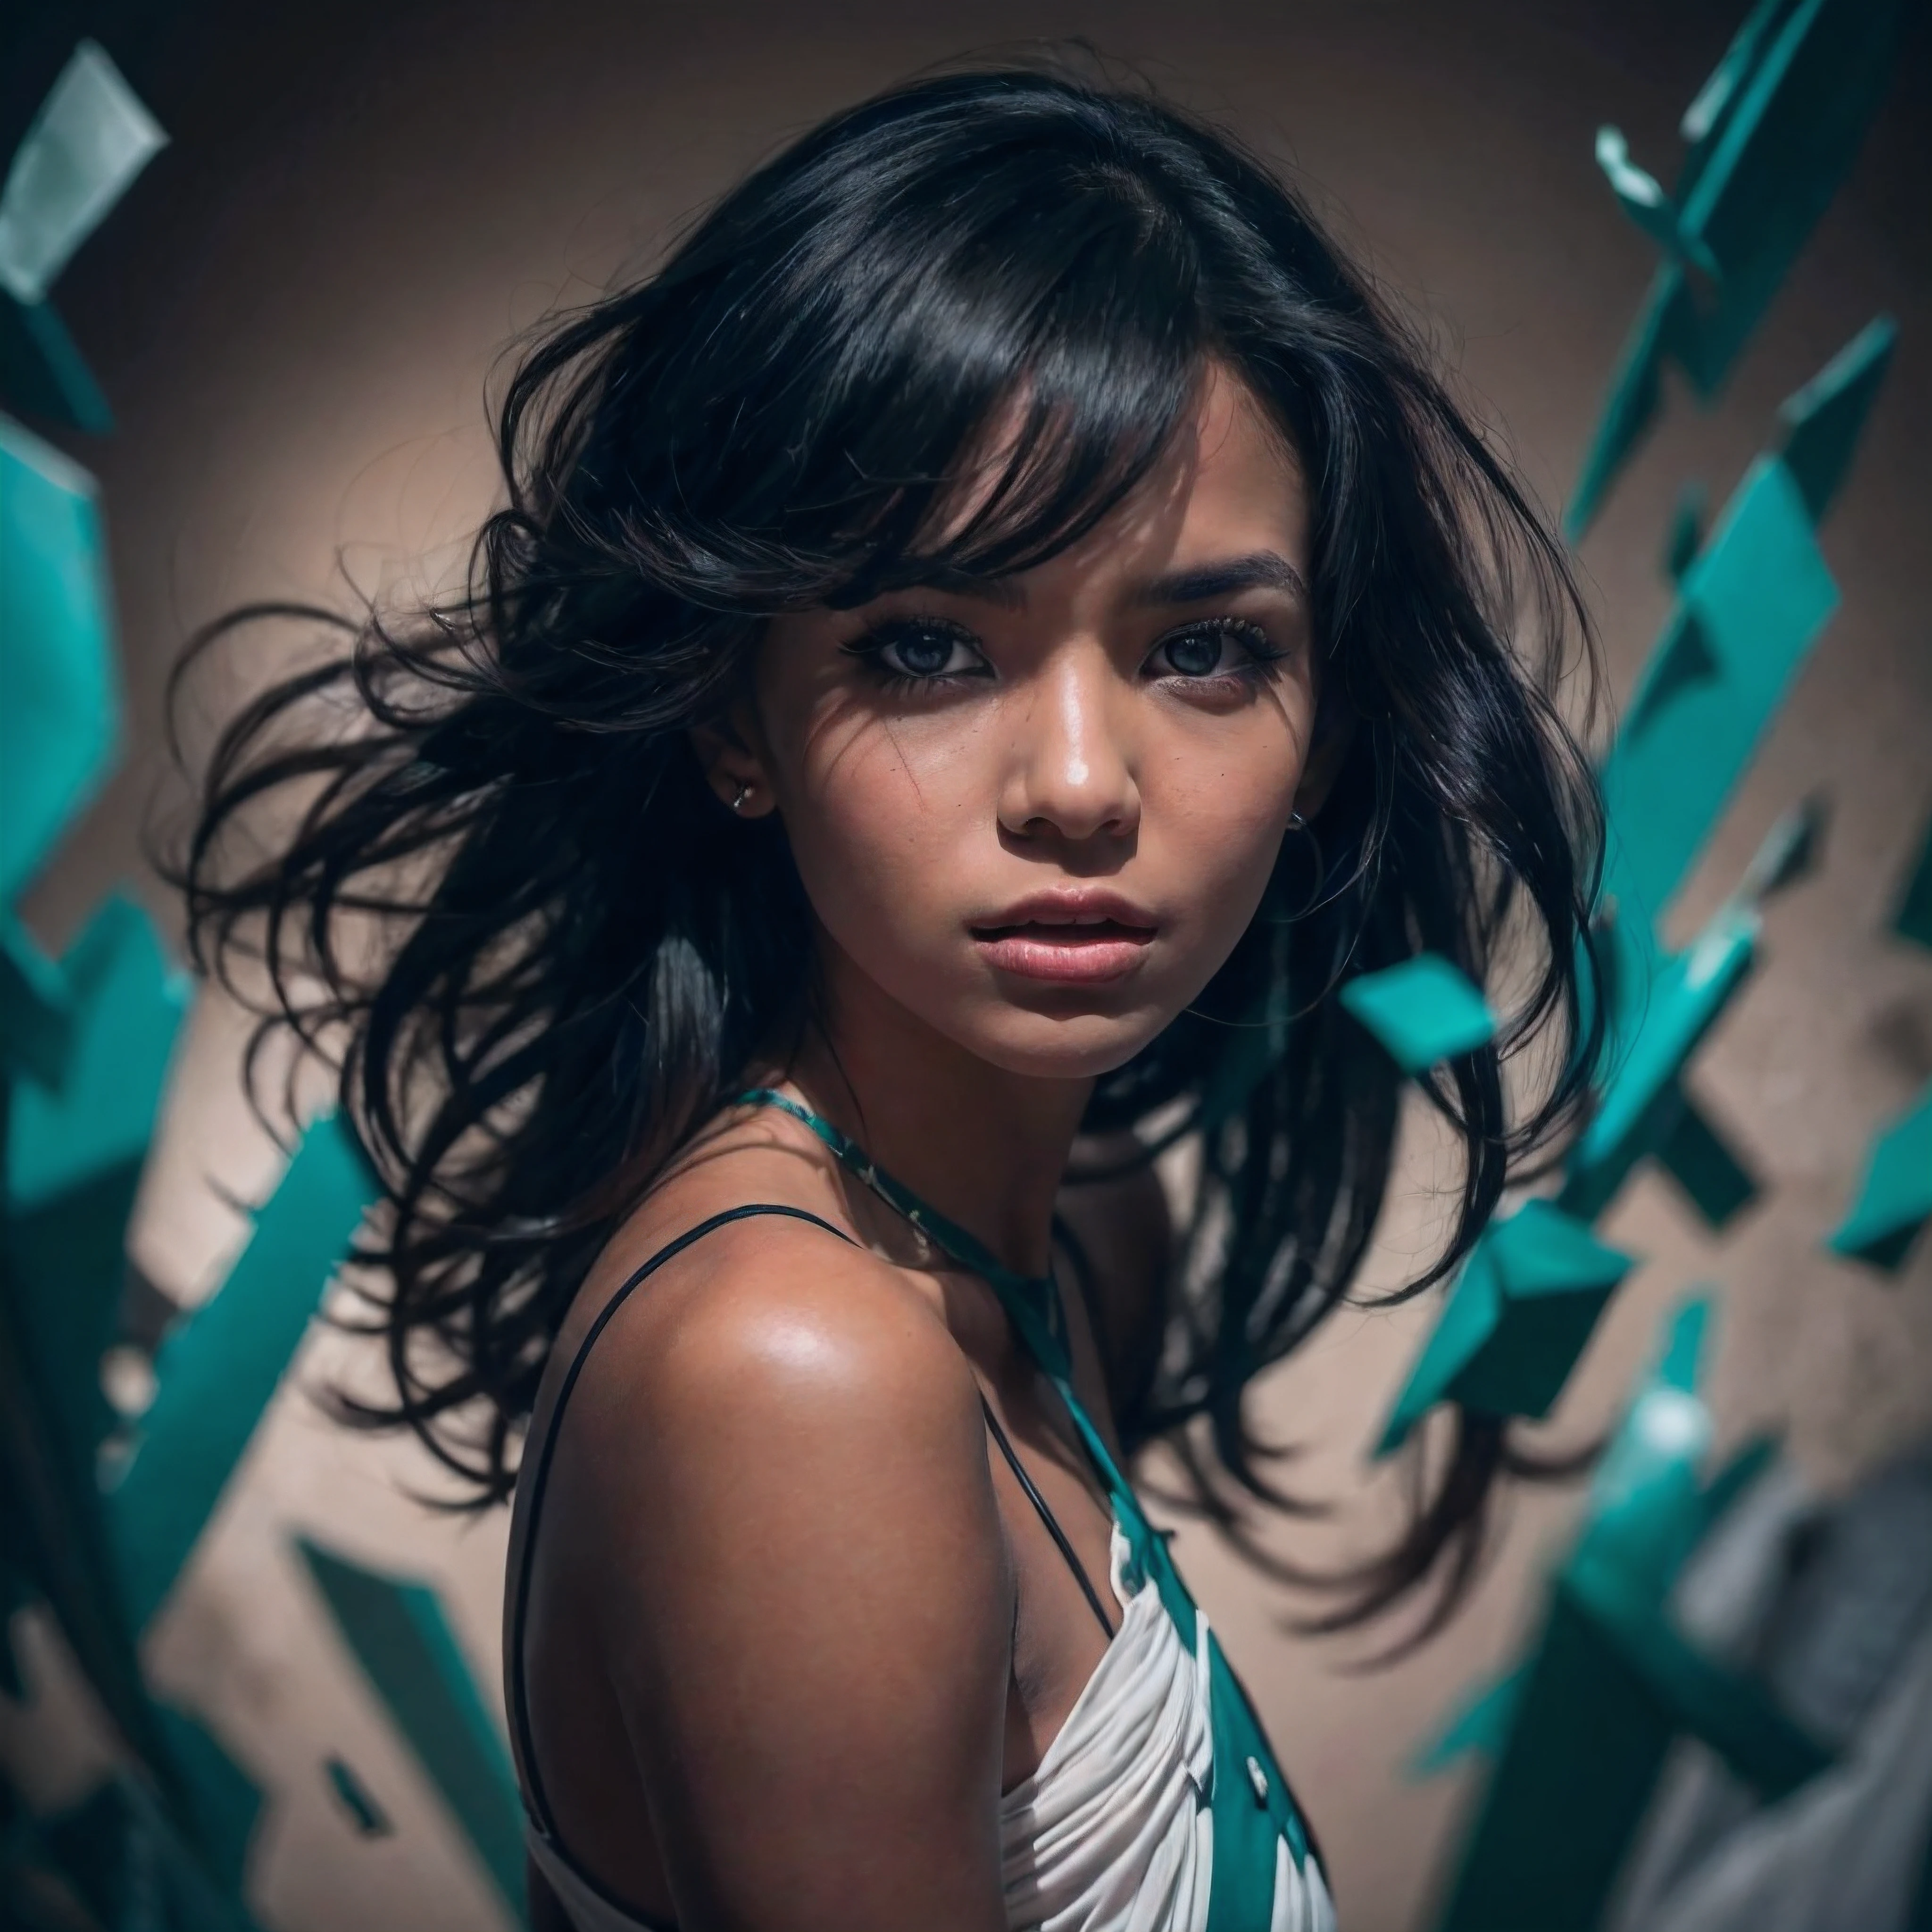 (Cinematic, emotional:1.3), (dynamic pose:1.2), (complex image:1.2), portrait of a woman striking a dynamic pose against a turquoise backdrop, glass shards around her, voluminous black hair highlighted, confident expression profiled, (small breasts, white accents), the photograph captured in stunning 8k resolution and raw format to preserve the highest quality of details, (her eyes are portrayed with meticulous attention to detail: 1.3), The photograph is taken with a lens that emphasizes the depth in her eyes, the backdrop is a dark room setting that enhances the colours of the scene. The lighting and shadows are expertly crafted to bring out the richness of her skin tone and the intense atmosphere. Her hair adds contrast against her skin, the overall composition captures her essence with authenticity and grace, creating a portrait that celebrates her heritage and beauty. Photography utilizing the best techniques for shadow and lighting, to create a mesmerizing portrayal that transcends the visual,